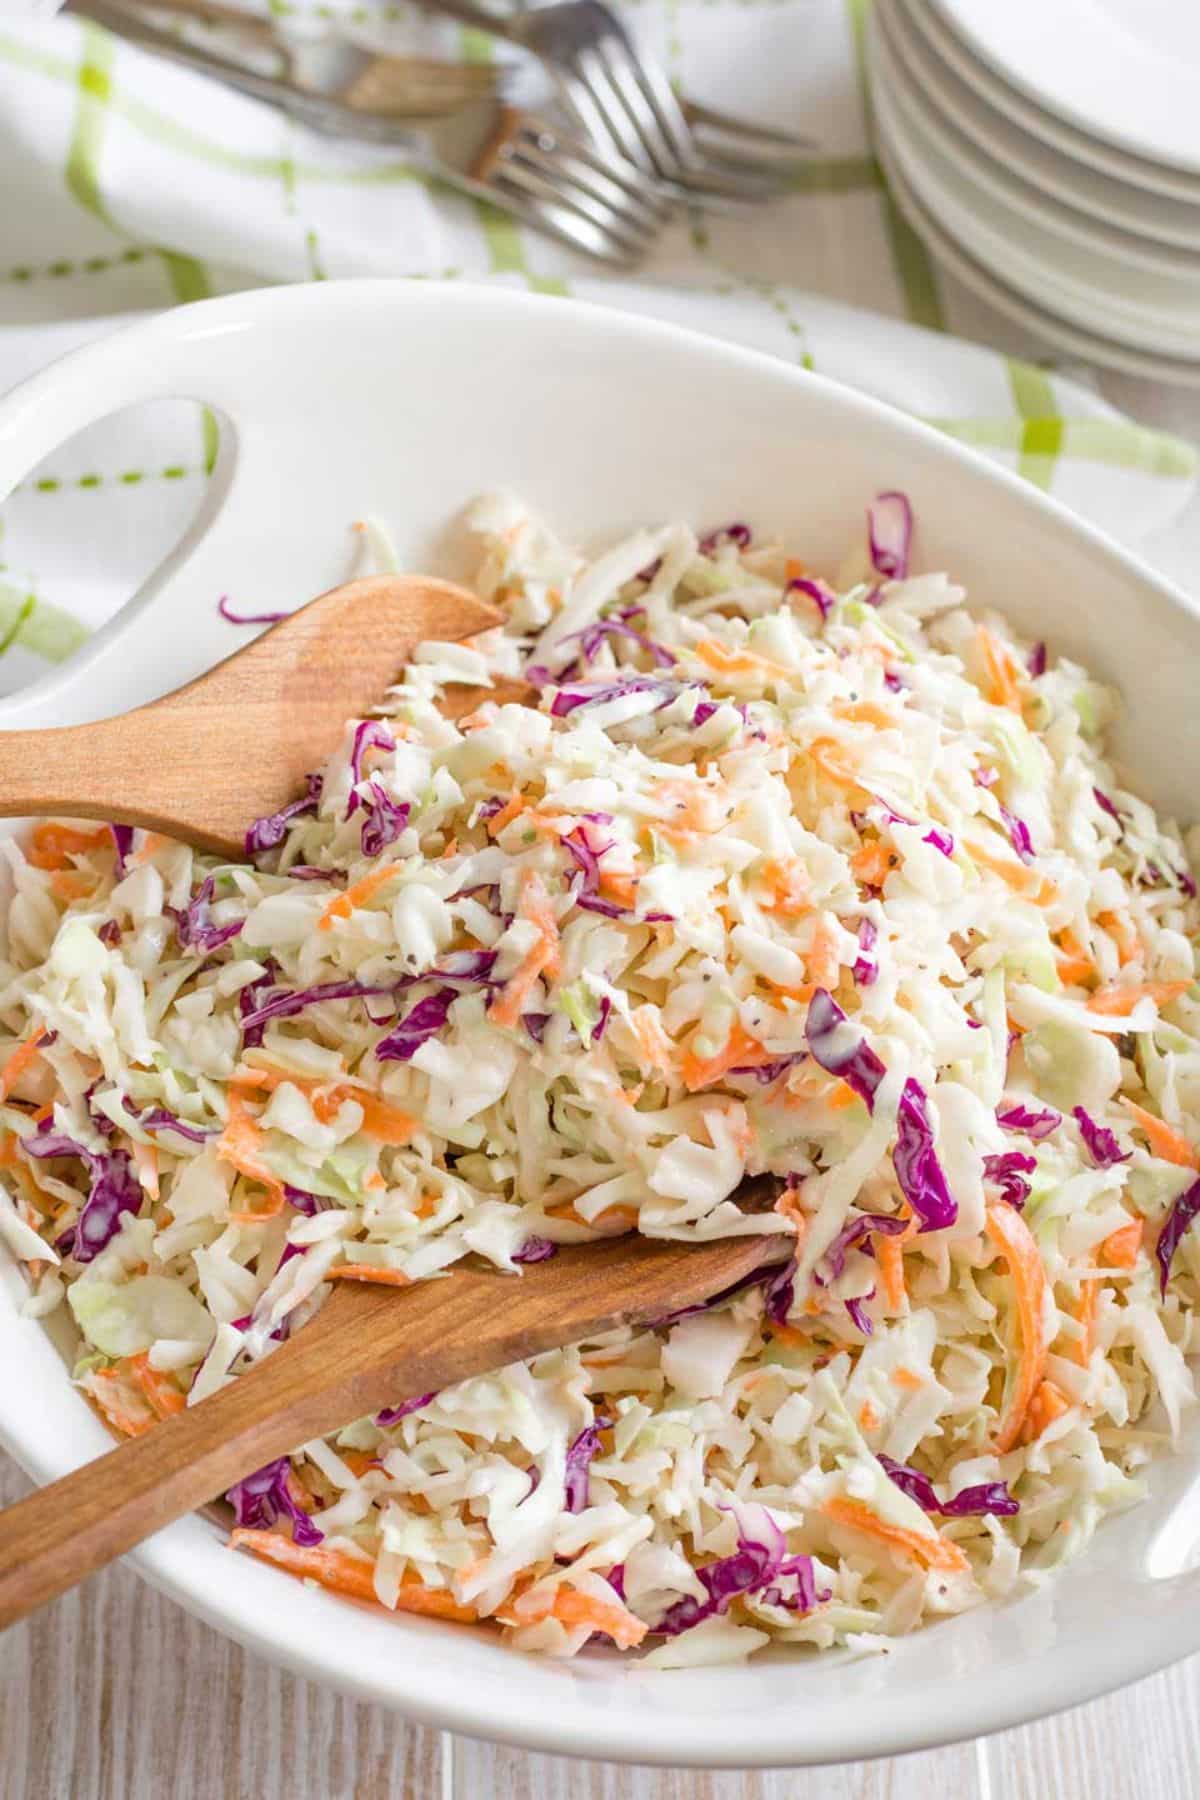 Healthy greek yogurt coleslaw in a white bowl with two wooden spoons.